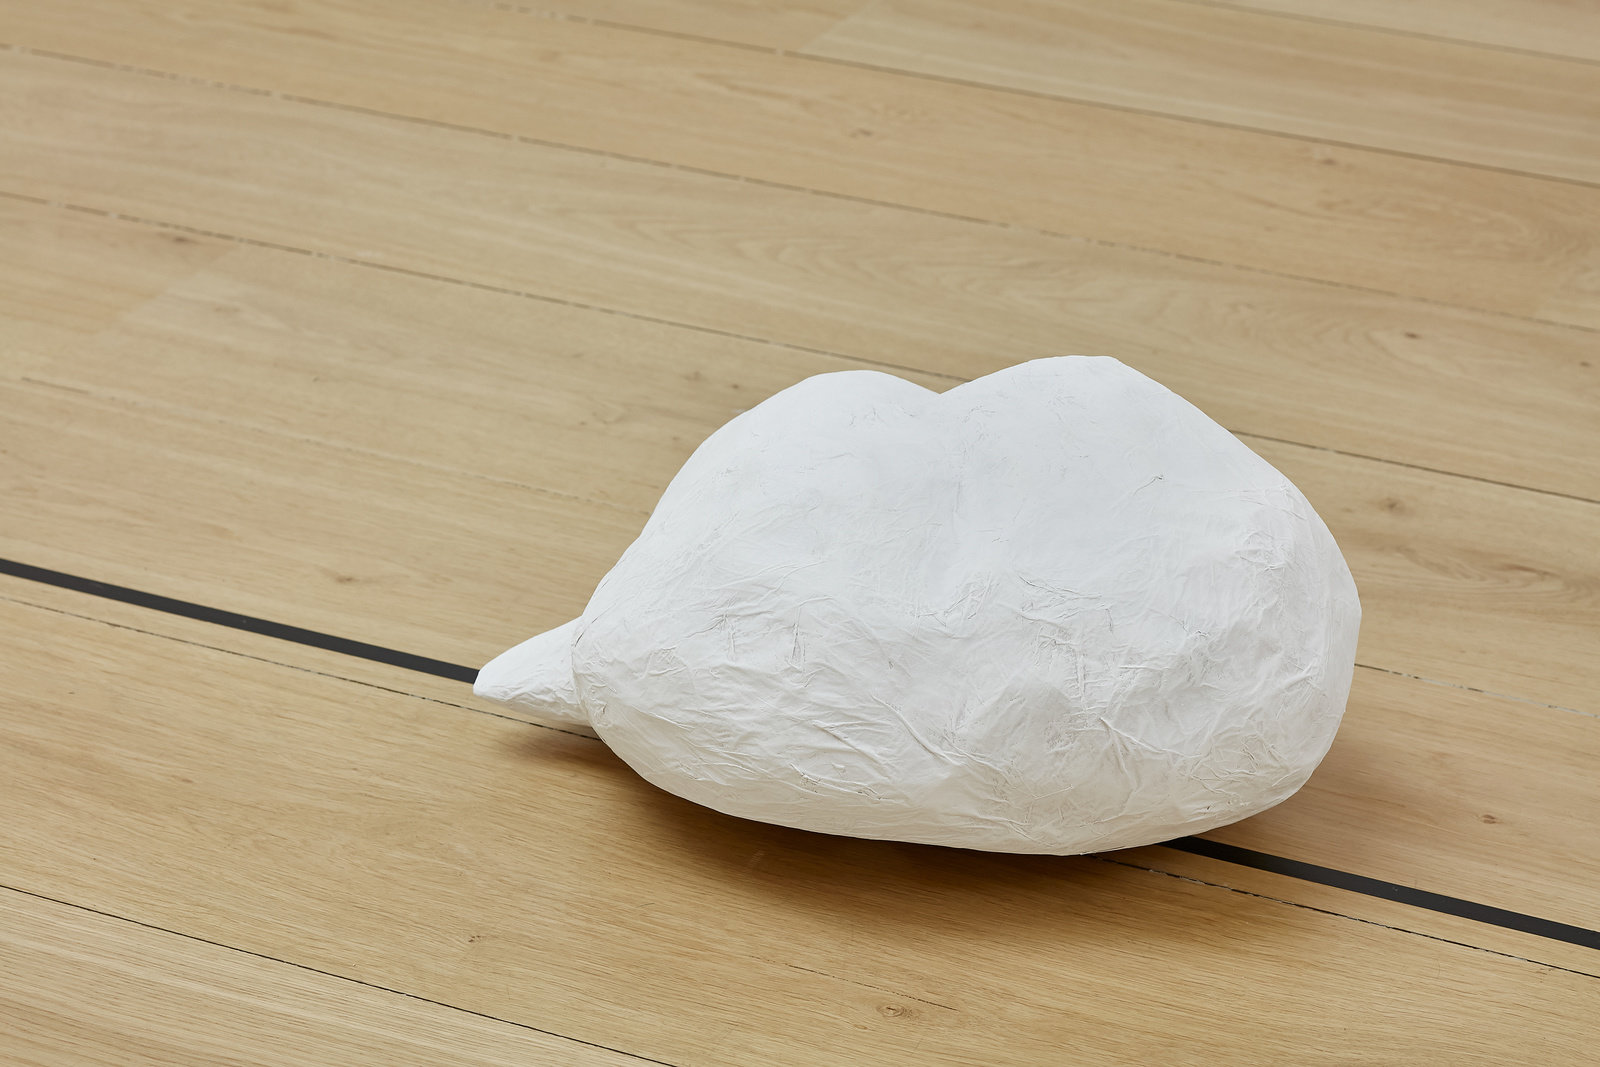 Lee, exhaust for me (robot), 2017, robot and papier mâché, edition of 3, dimensions variable, cnon 59.712